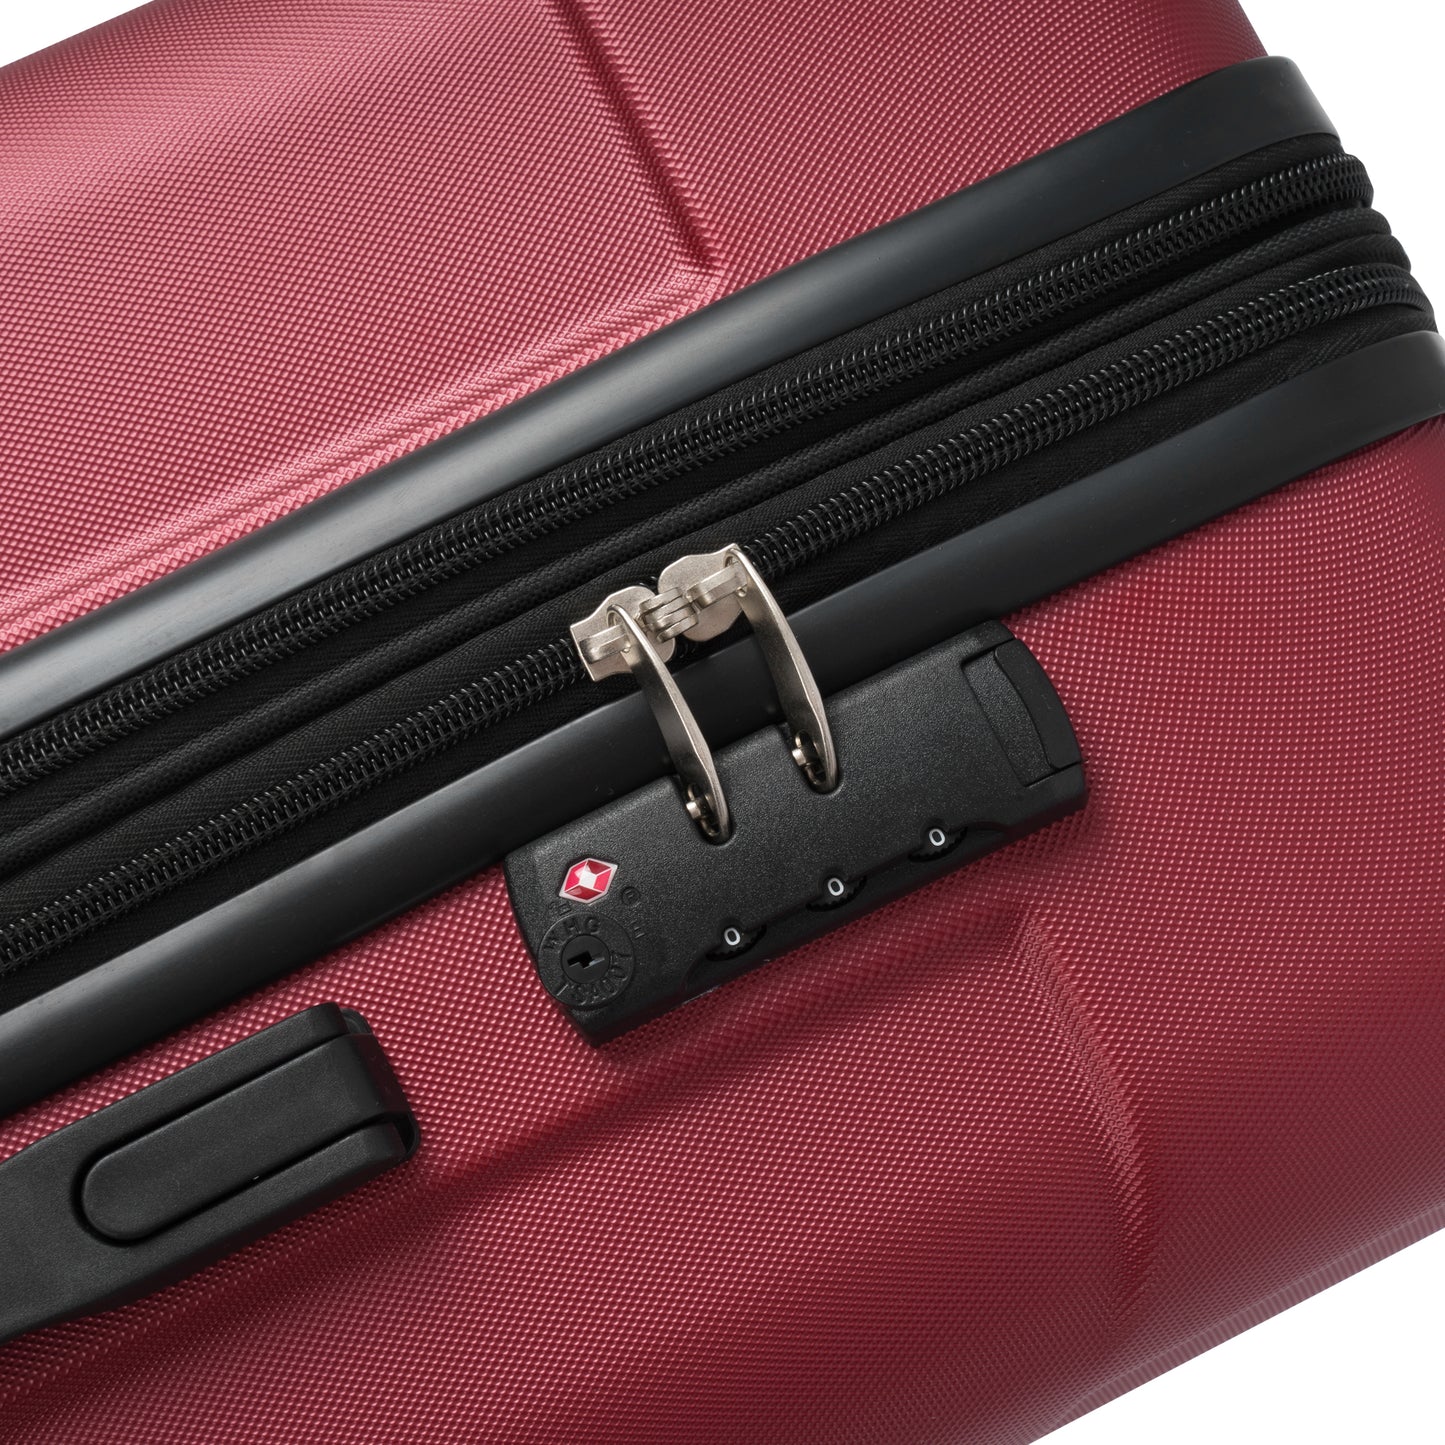 Hardshell Luggage Spinner Suitcase with TSA Lock Lightweight Expandable 24'' (Single Luggage) Red + ABS + 24 Inch